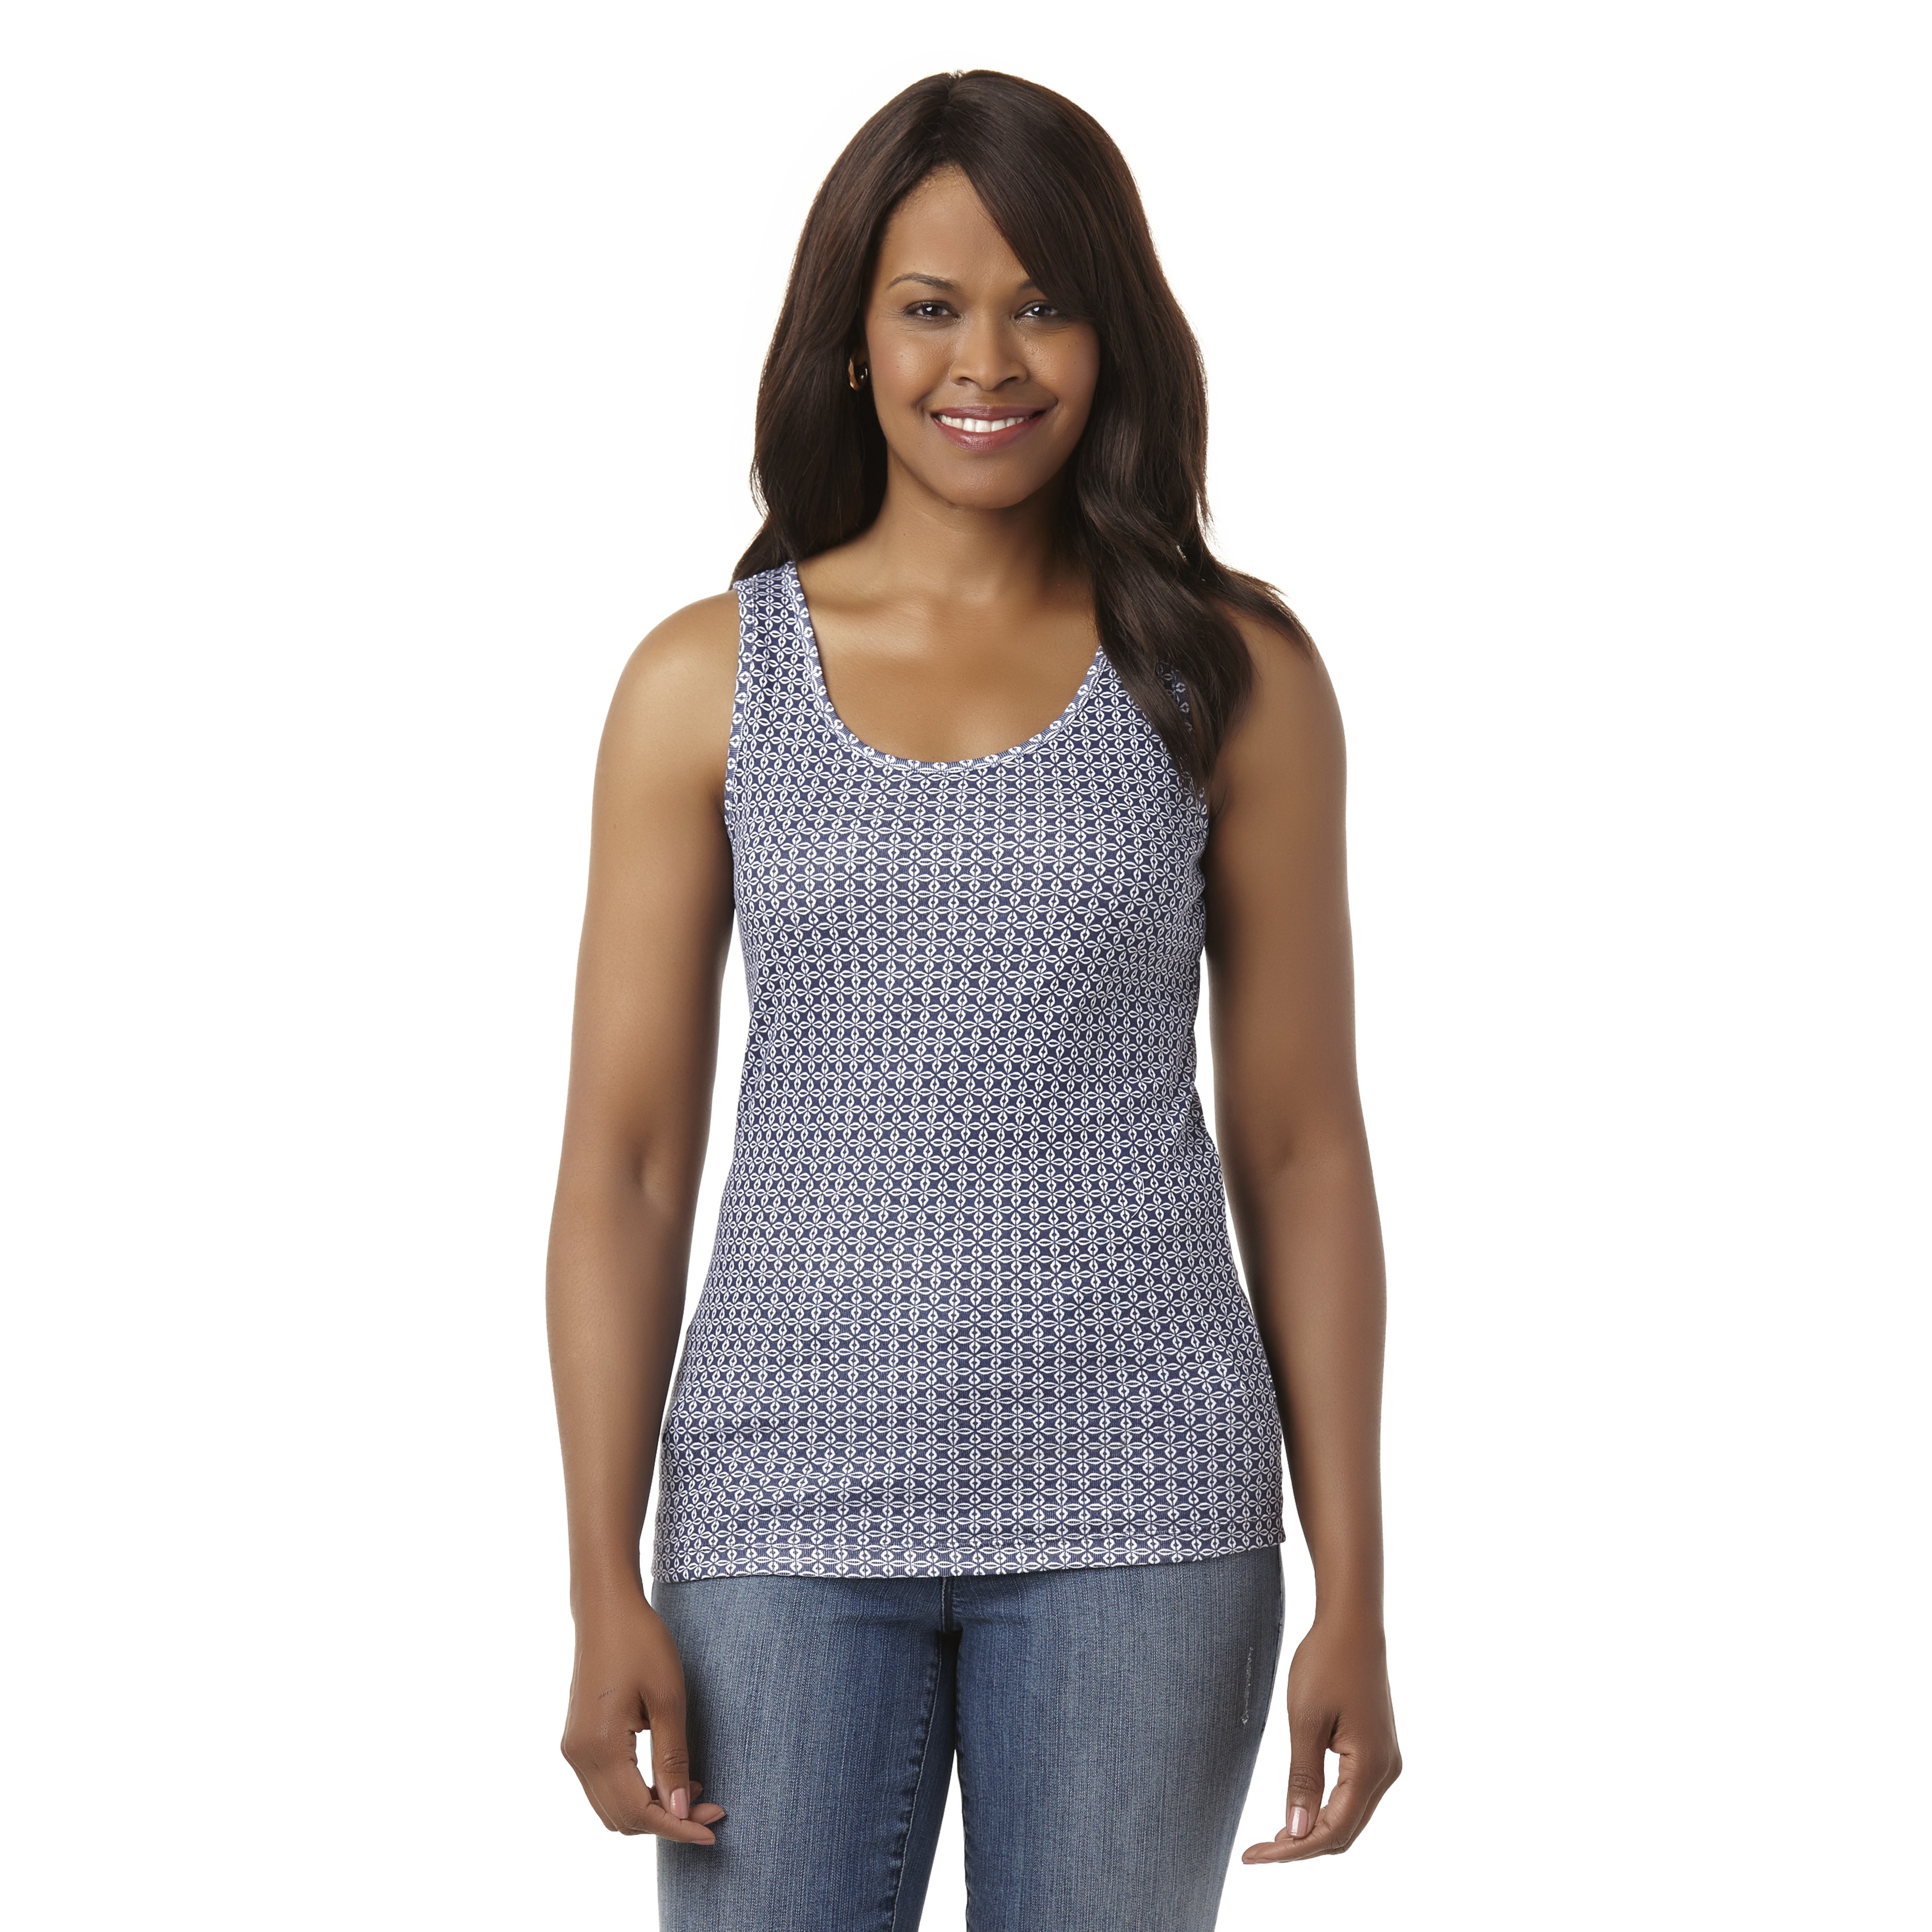 Basic Editions Women's Fitted Tank Top - Geometric